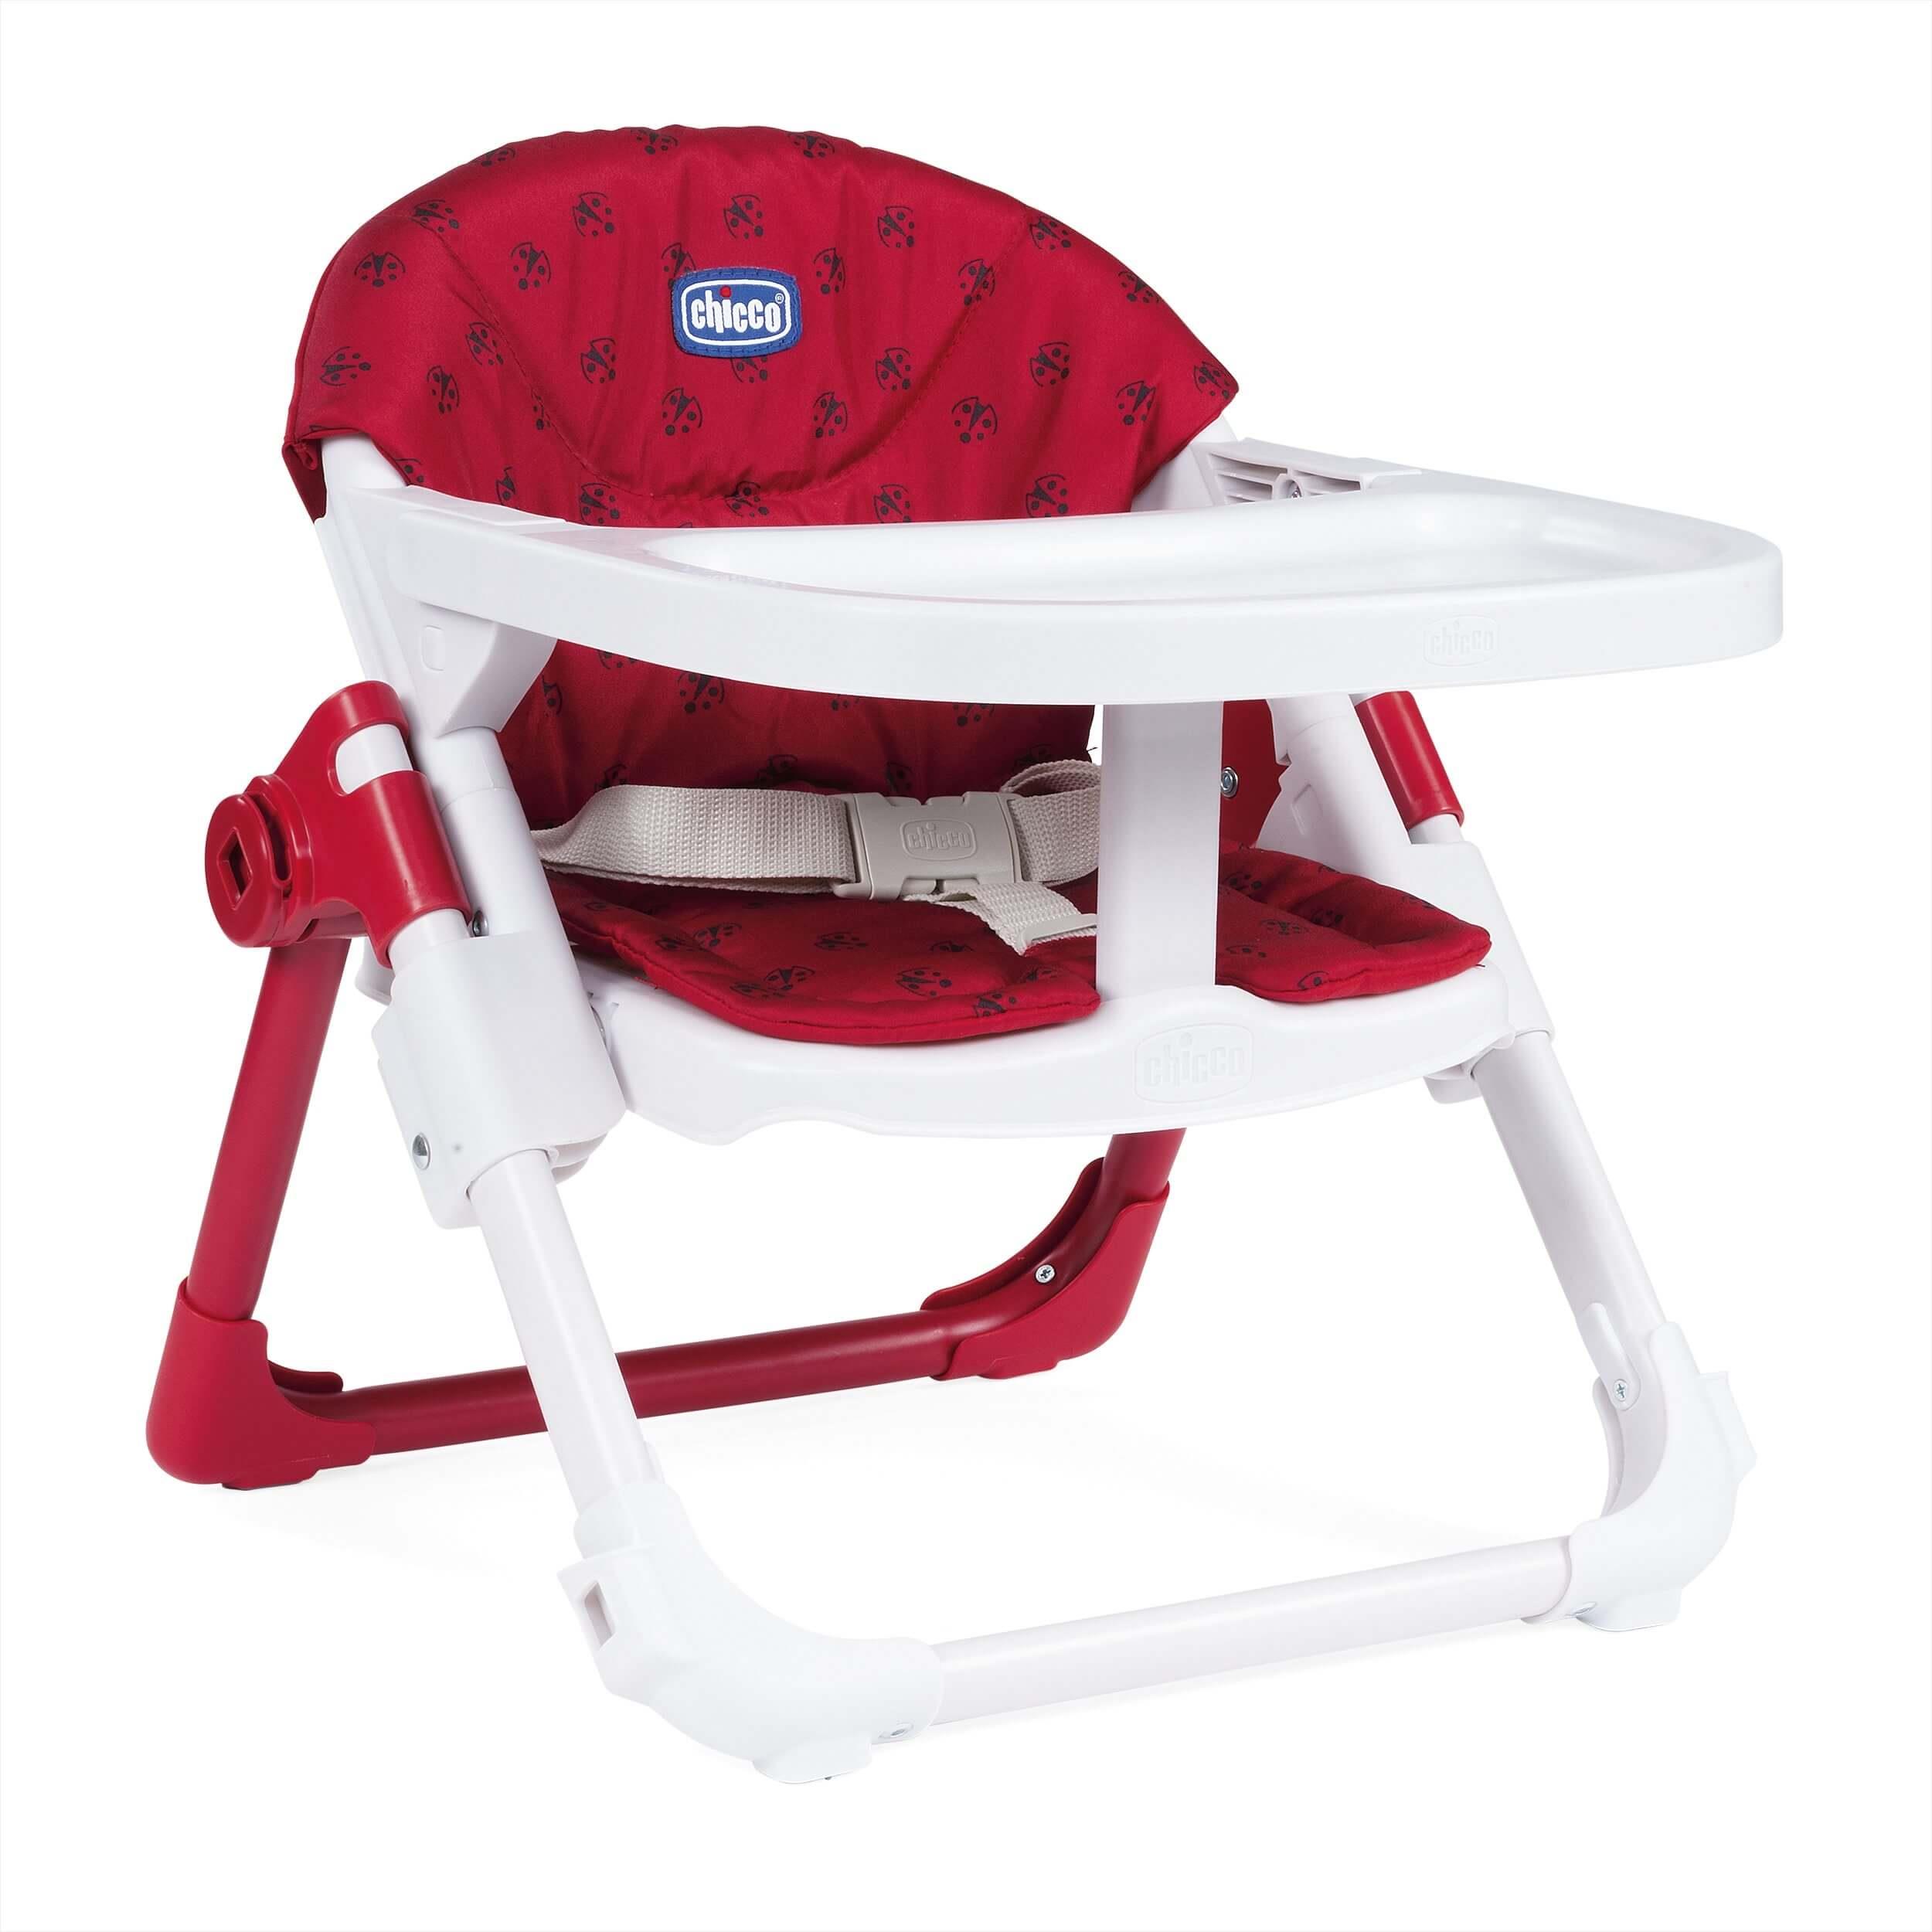 CHICCO - REHAUSSEUR TRANSFORMABLE [CHAIRY] [LADYBUG]